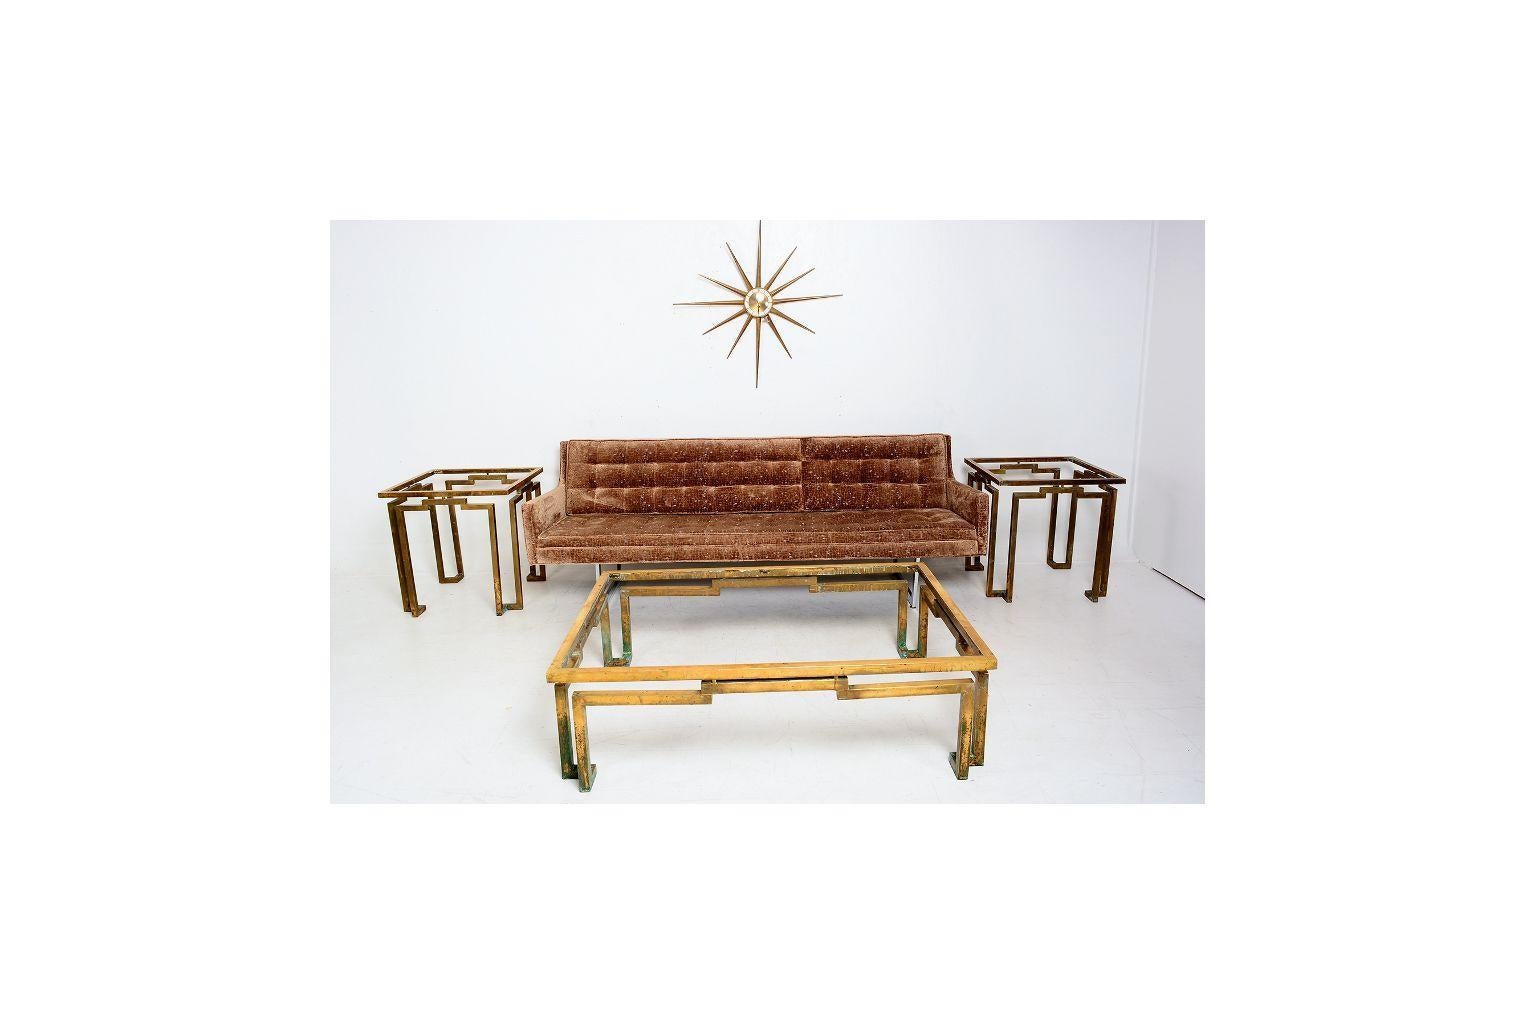 Coffee Table
Fabulous Mexican Modernism Rectangular Coffee- Cocktail Table
Solid Brass and Glass designed by Arturo Pani Mexico 1950s.  
Sculptural Greek design table remains in original unrestored vintage preowned condition. Patina is